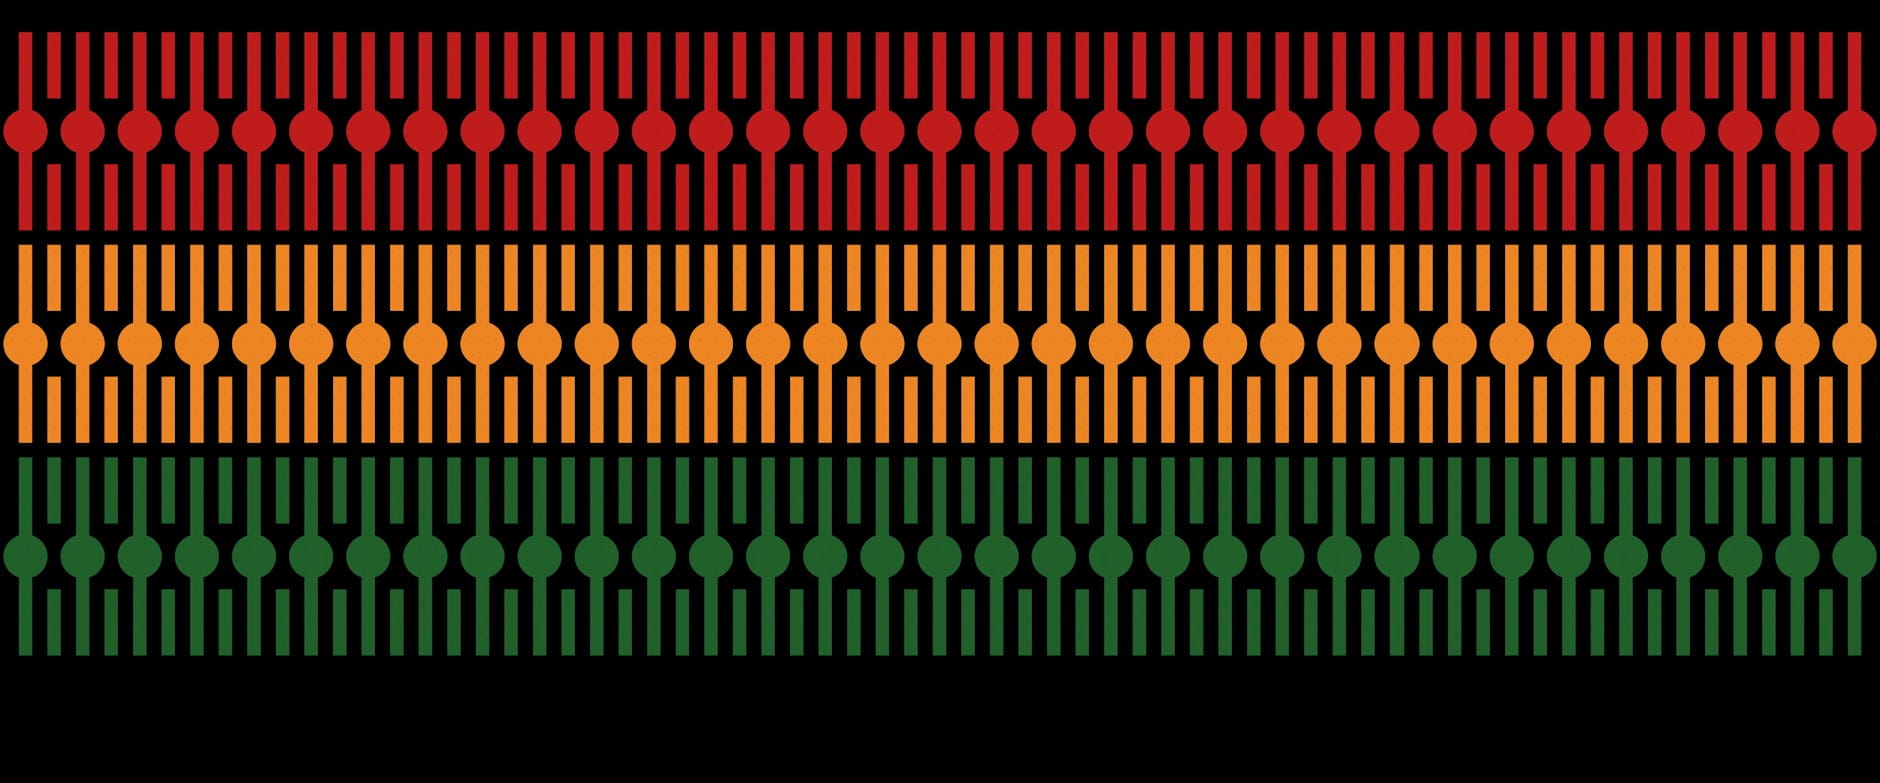 Red, yellow, and green illustrated texture over a black background